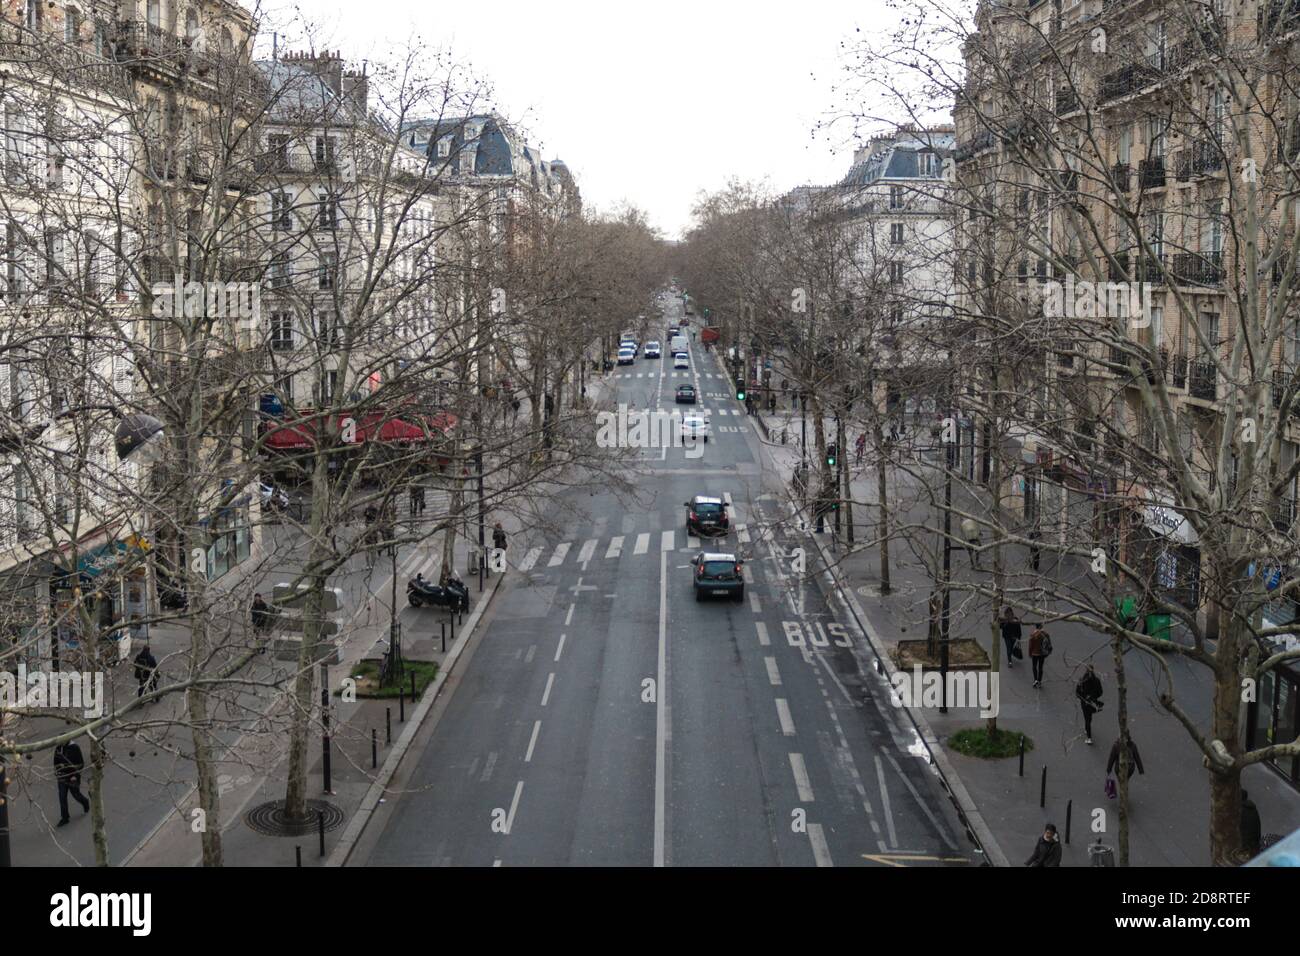 A view of a Paris street from France Stock Photo